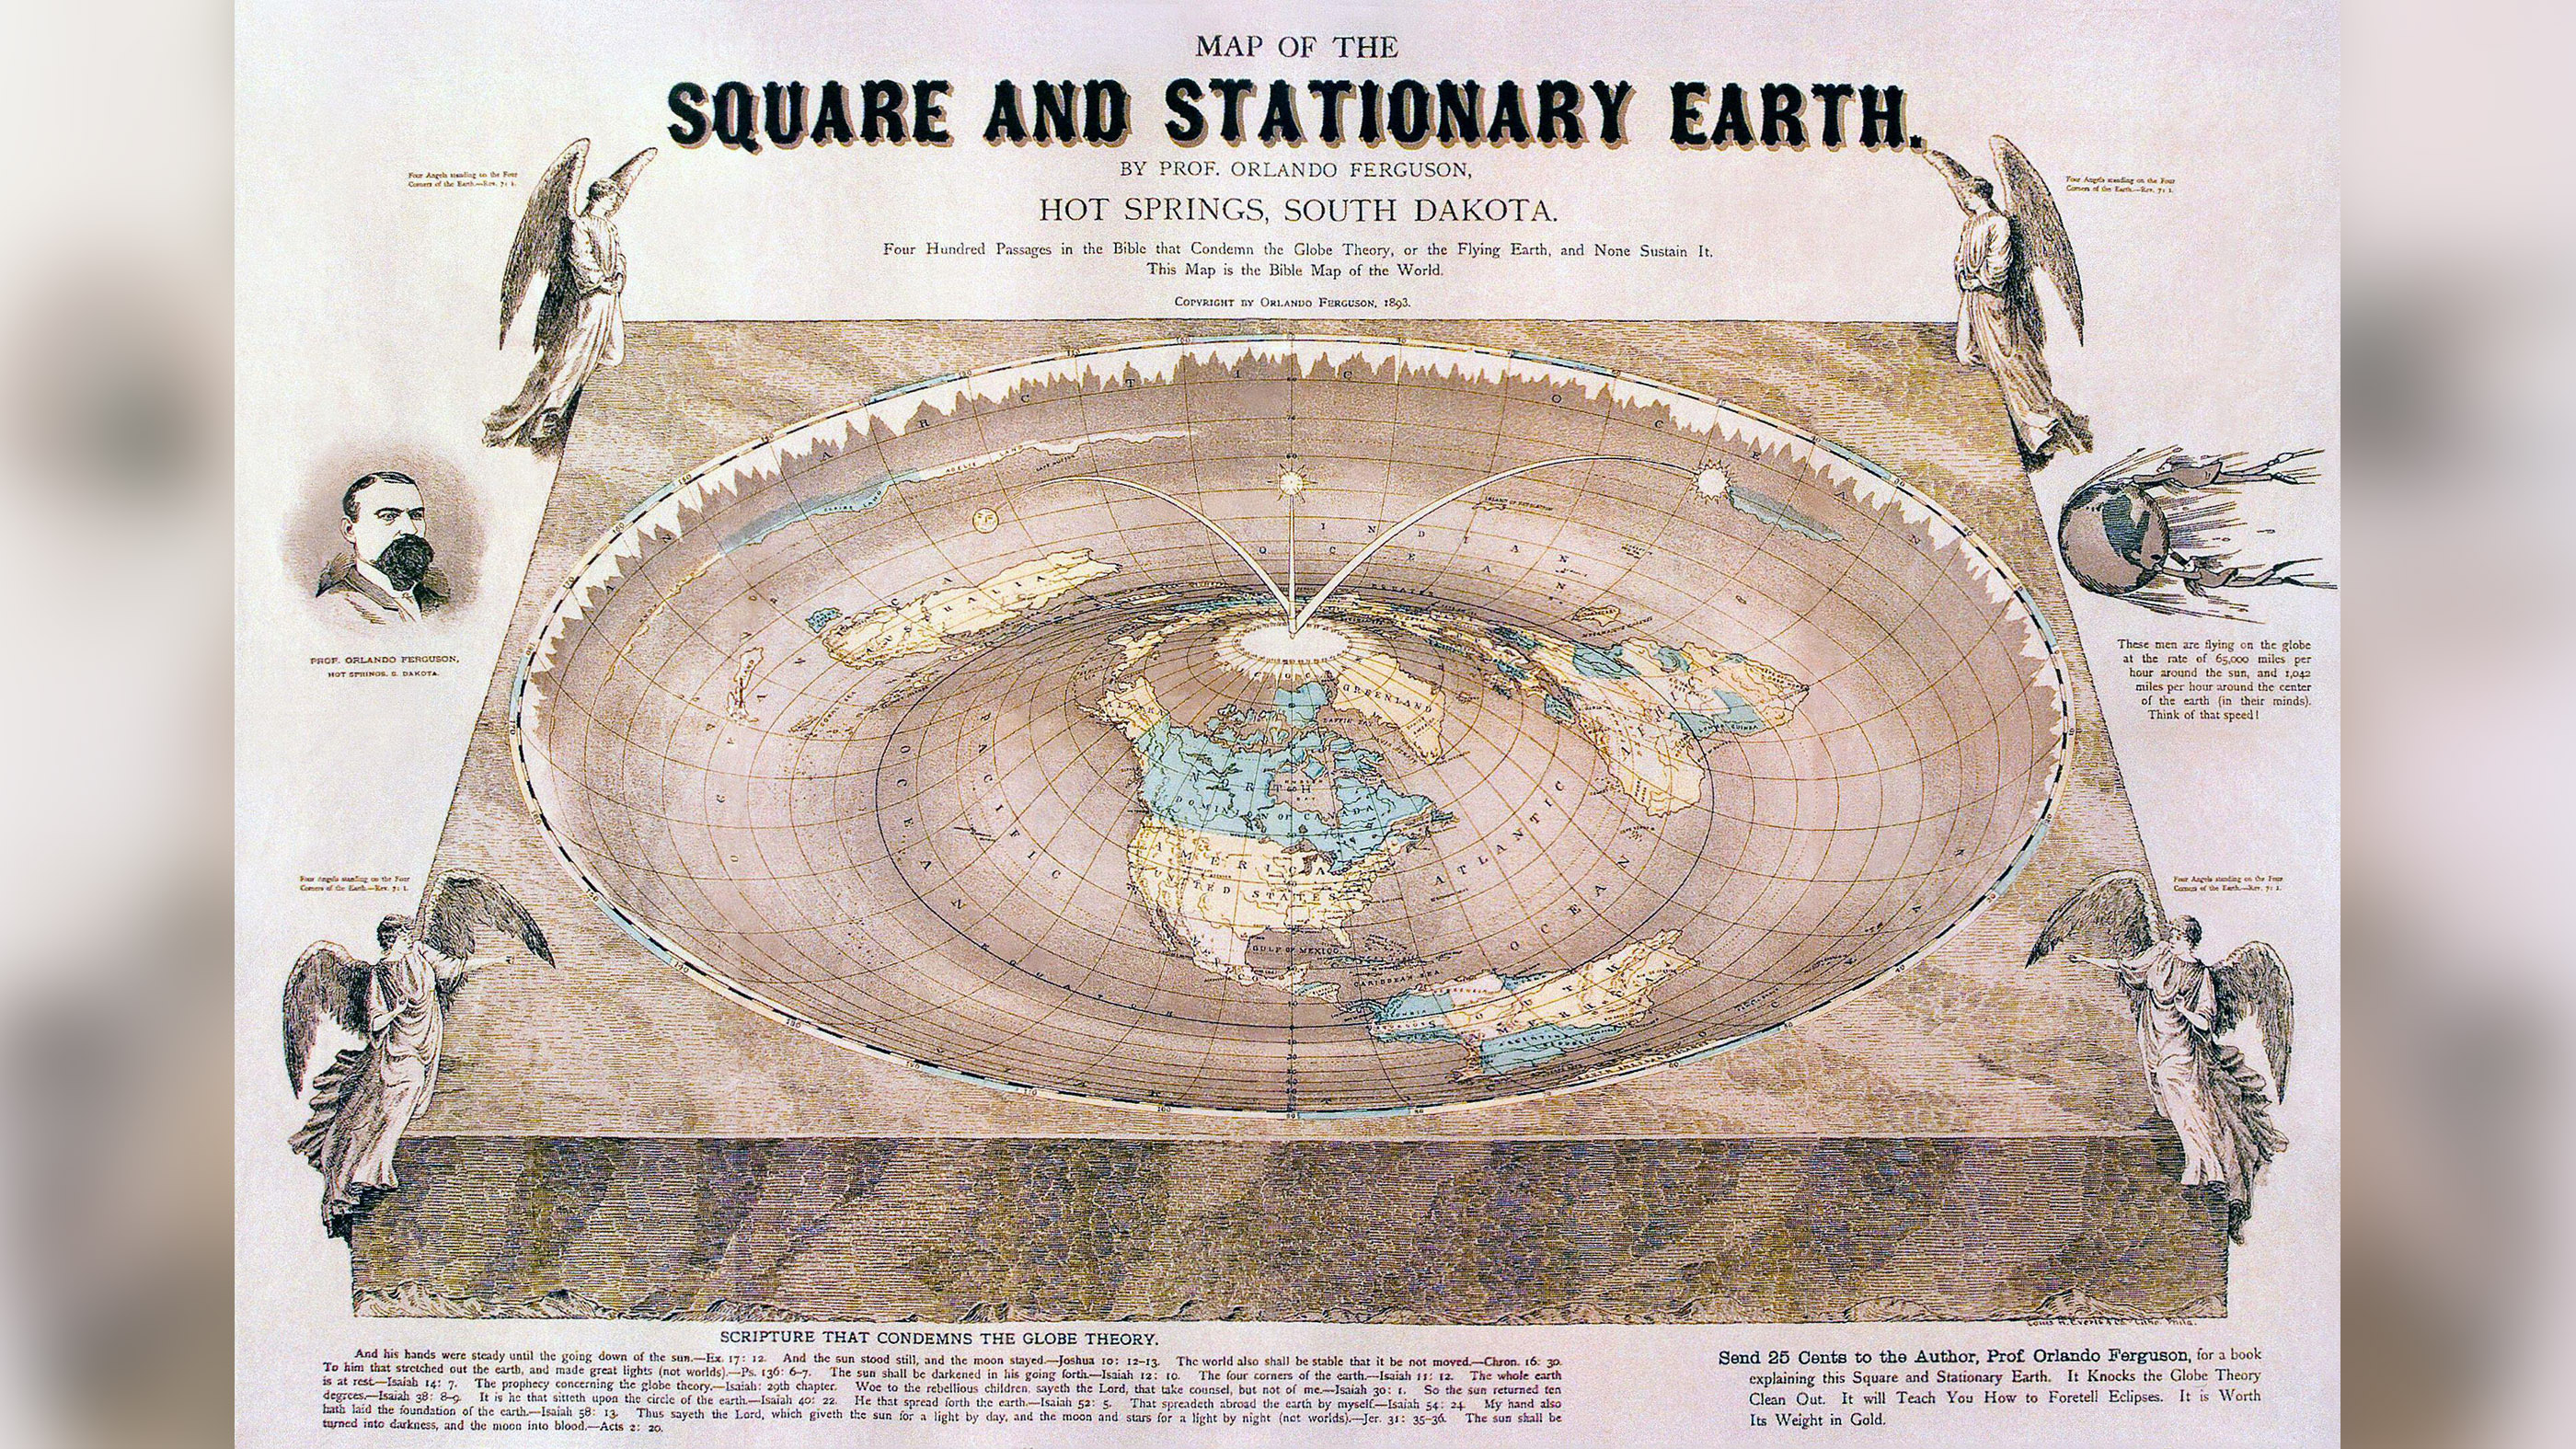 This flat Earth map drawn by Orlando Ferguson in 1893 is also considered the Bible Map of the World.